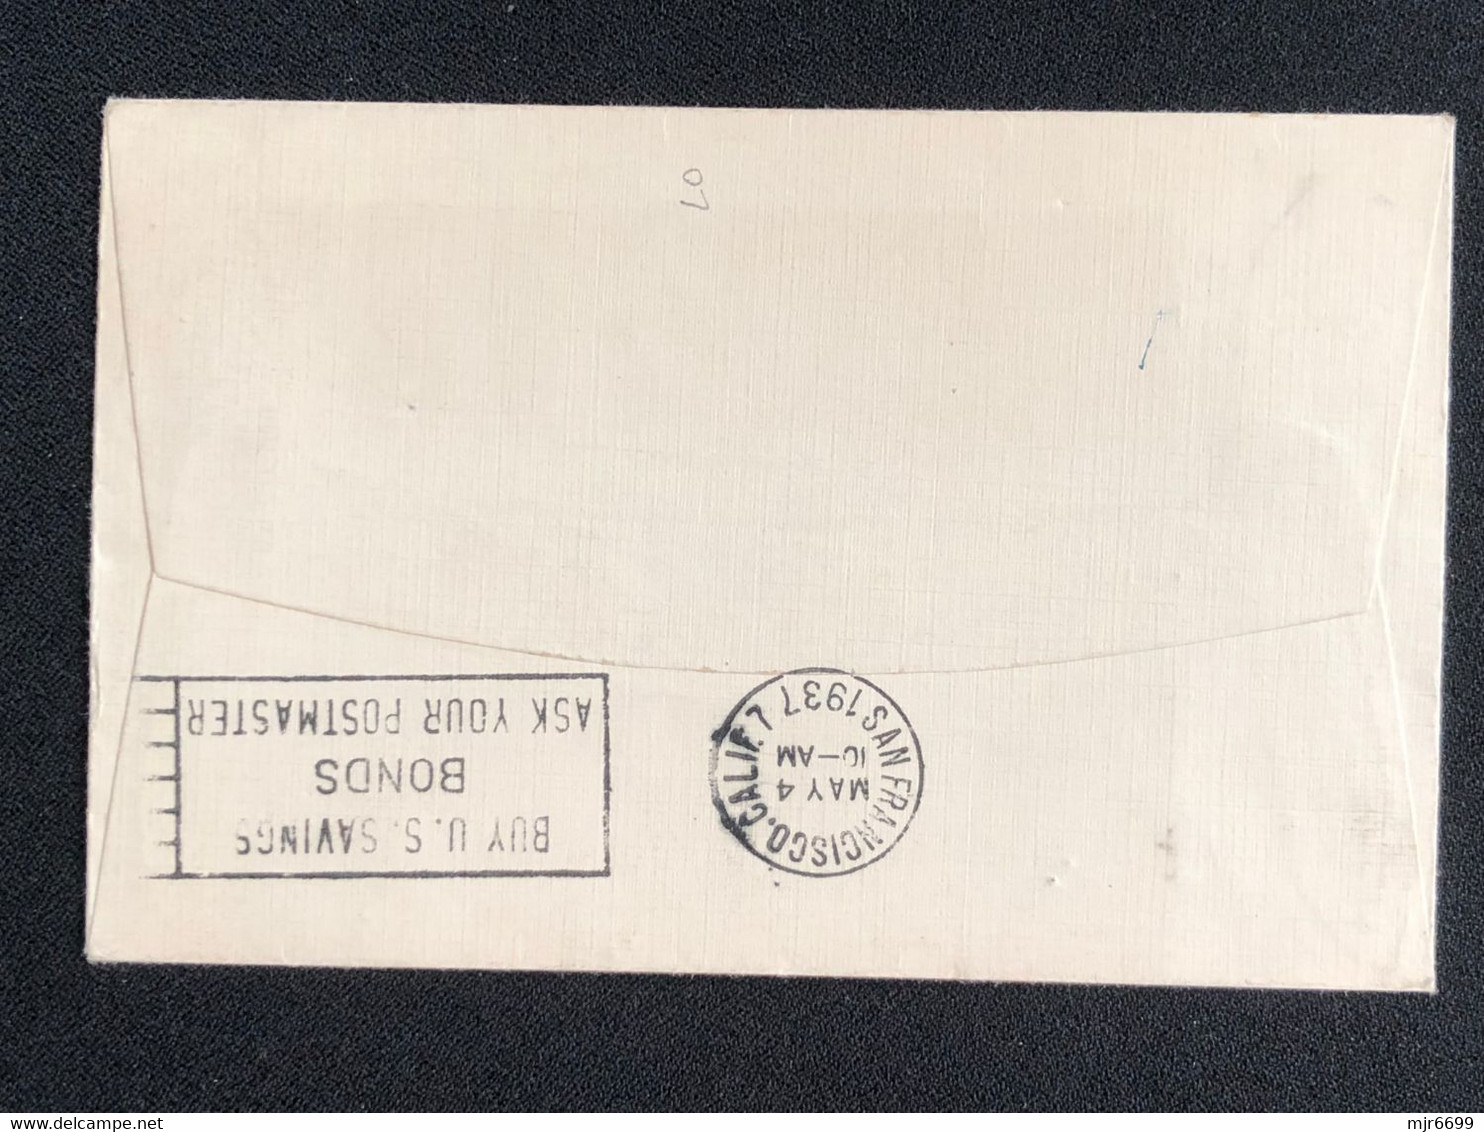 1937 FIRST FLIGHT COVER - MACAO TO SAN FRANCISCO- W/RATE 3.05 PATACAS,  ARRIVAL PROPAGANDA CANCEL ON BACK. - Covers & Documents